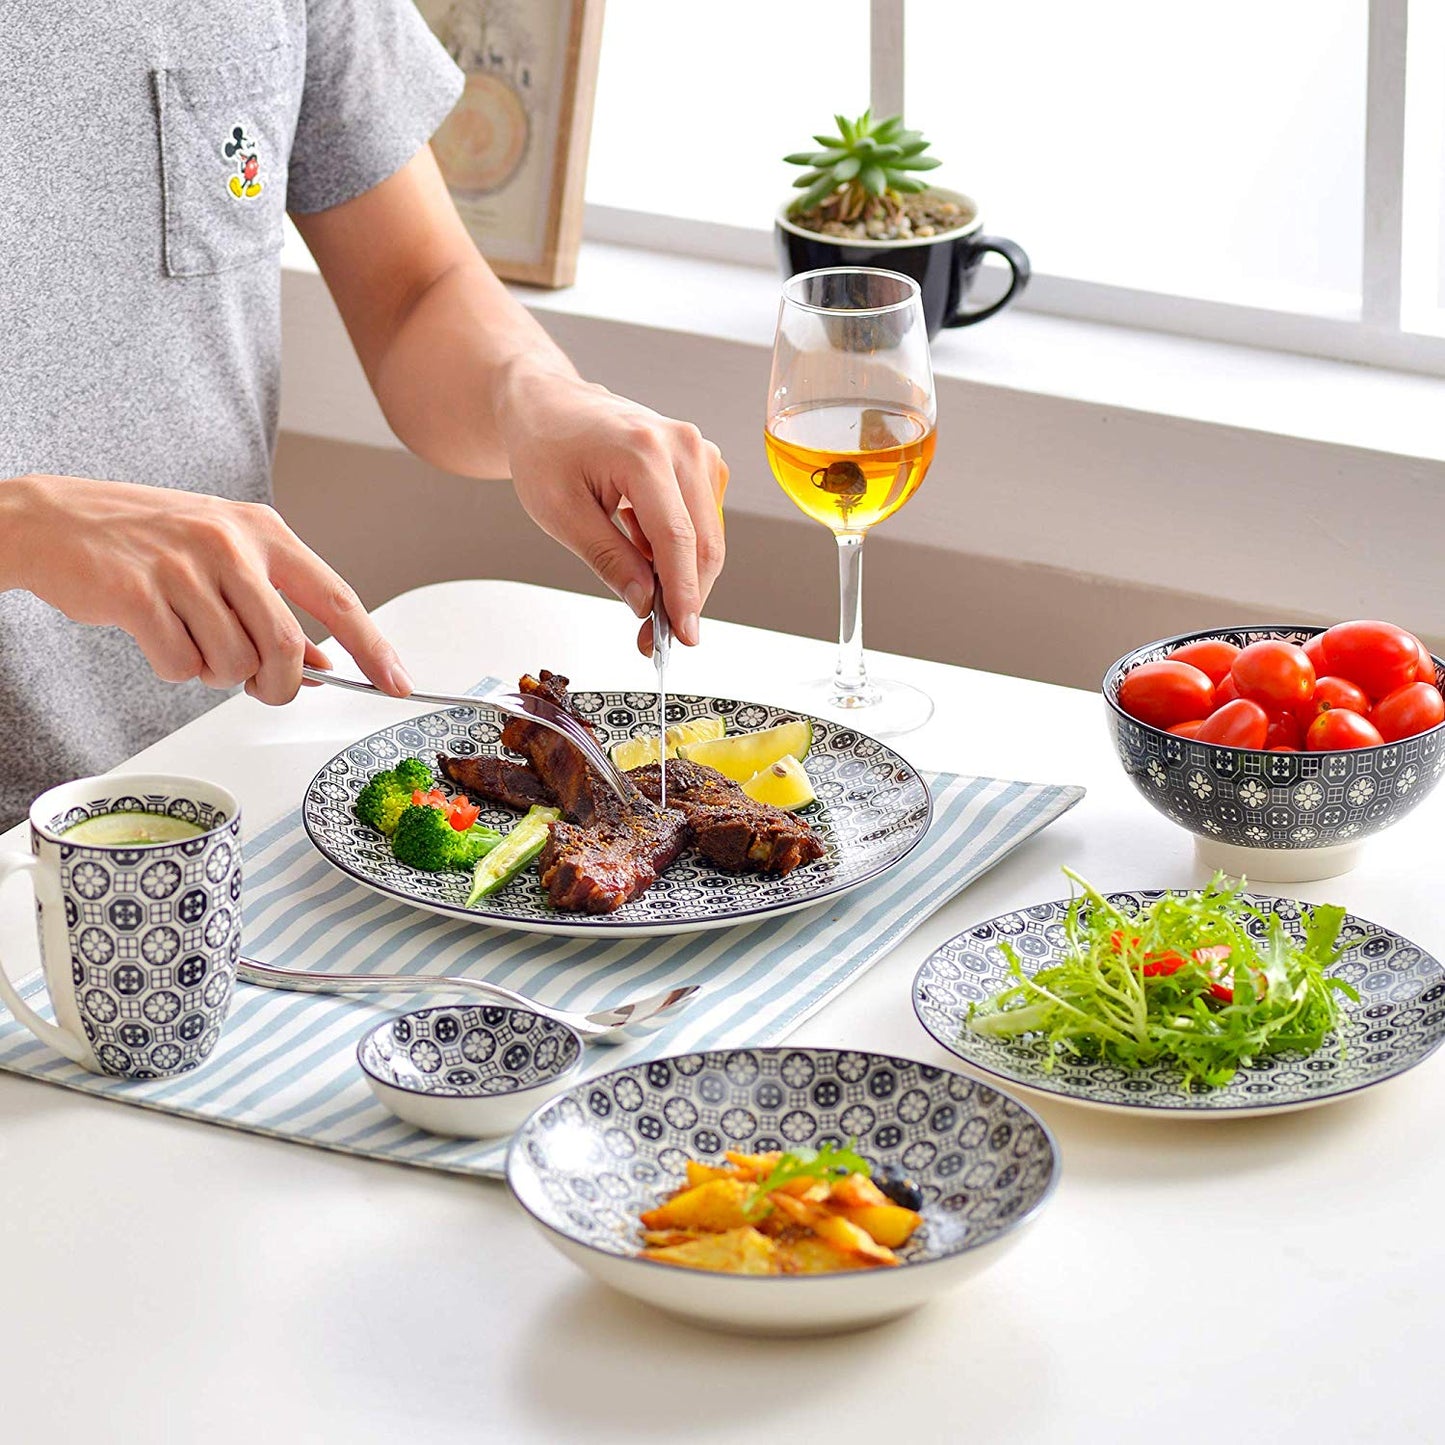 Haruka 24 Pieces Porcelain Japanese Style Dinnerware Set  with 4*Dinner Plate,Dessert Plate,Bowl,Mug and 8*Dishes Set - Nordic Side - 24, and, Dinner, Dinnerware, Dishes, Haruka, Japanese, Pi